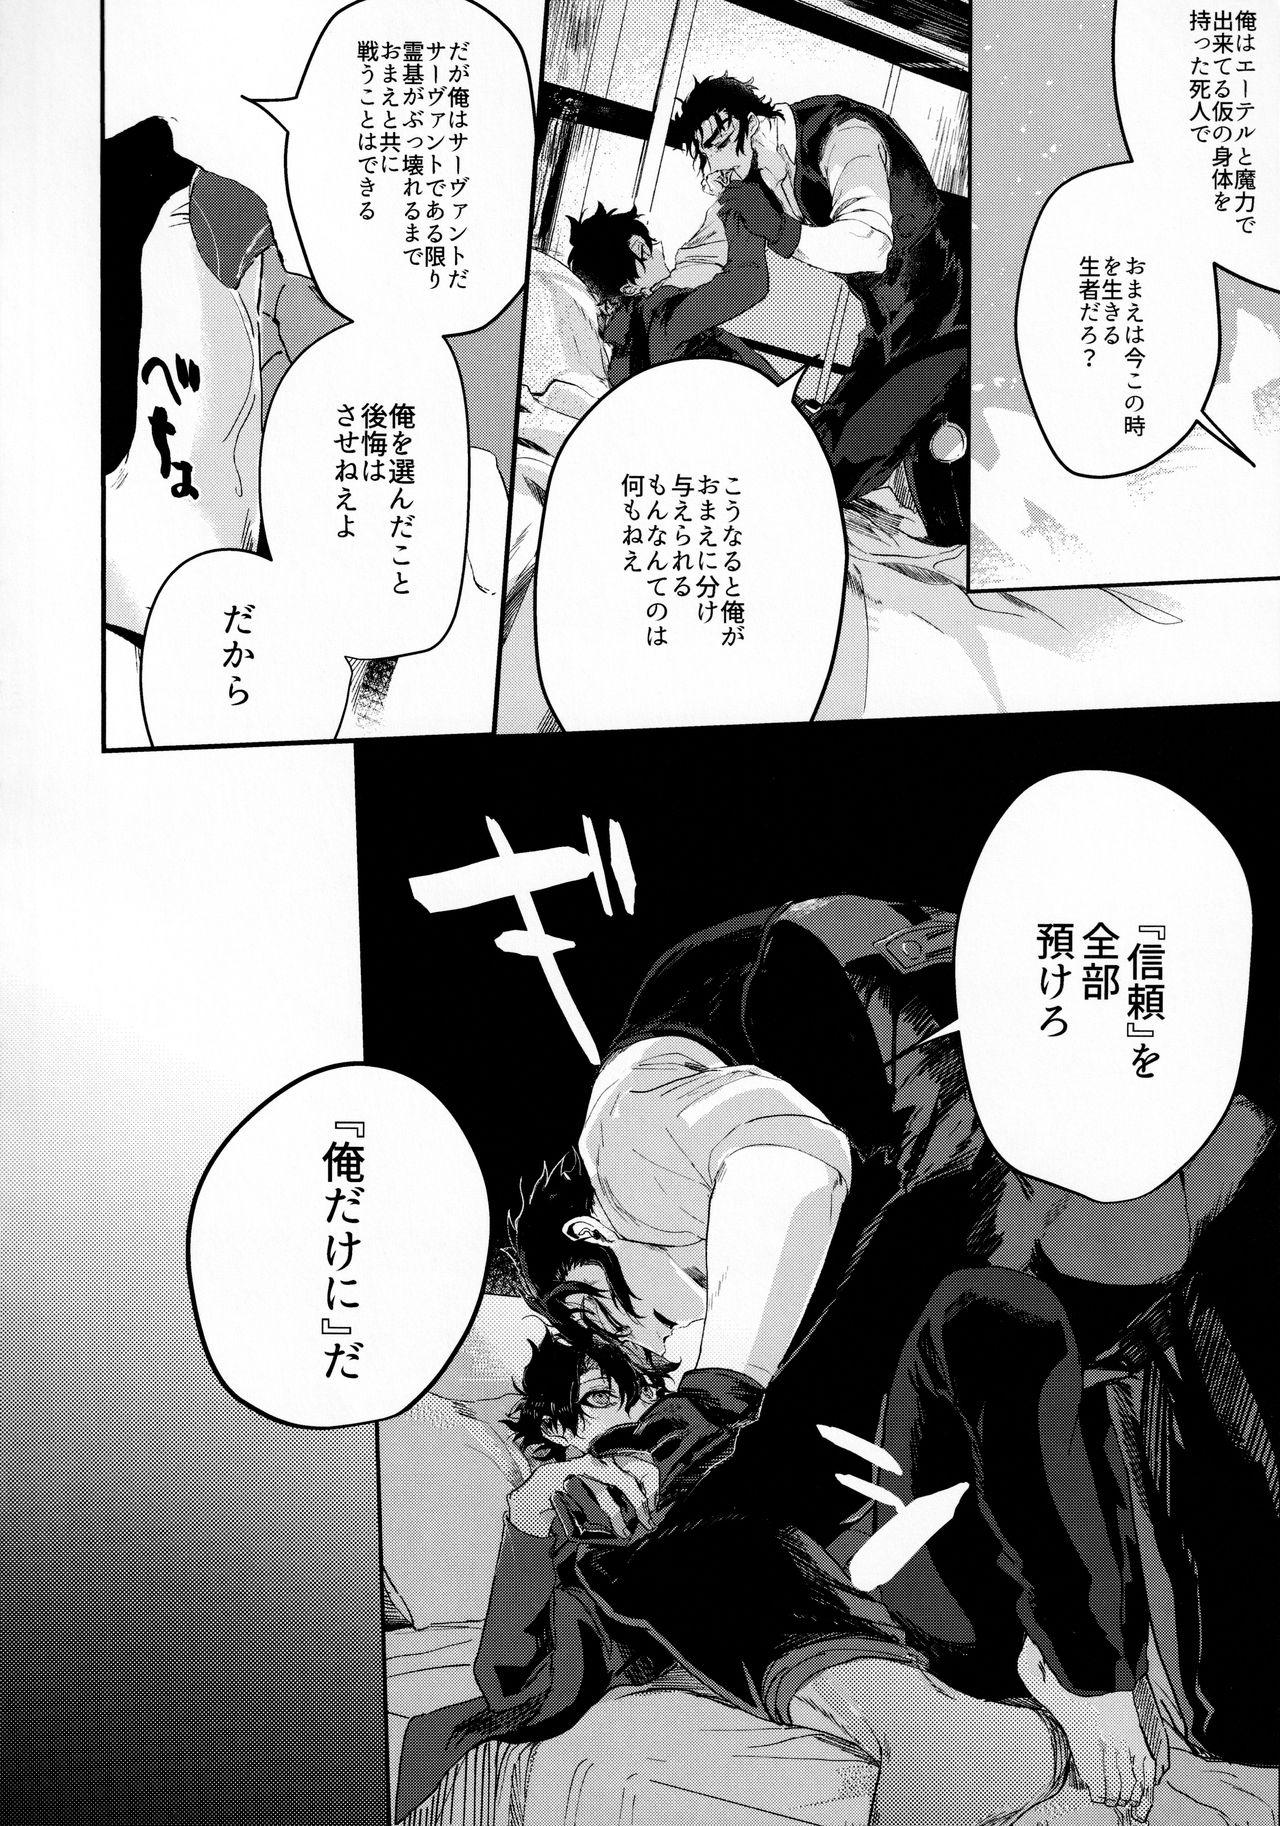 Sem Camisinha 耽溺と熱 - Fate grand order Pool - Page 11